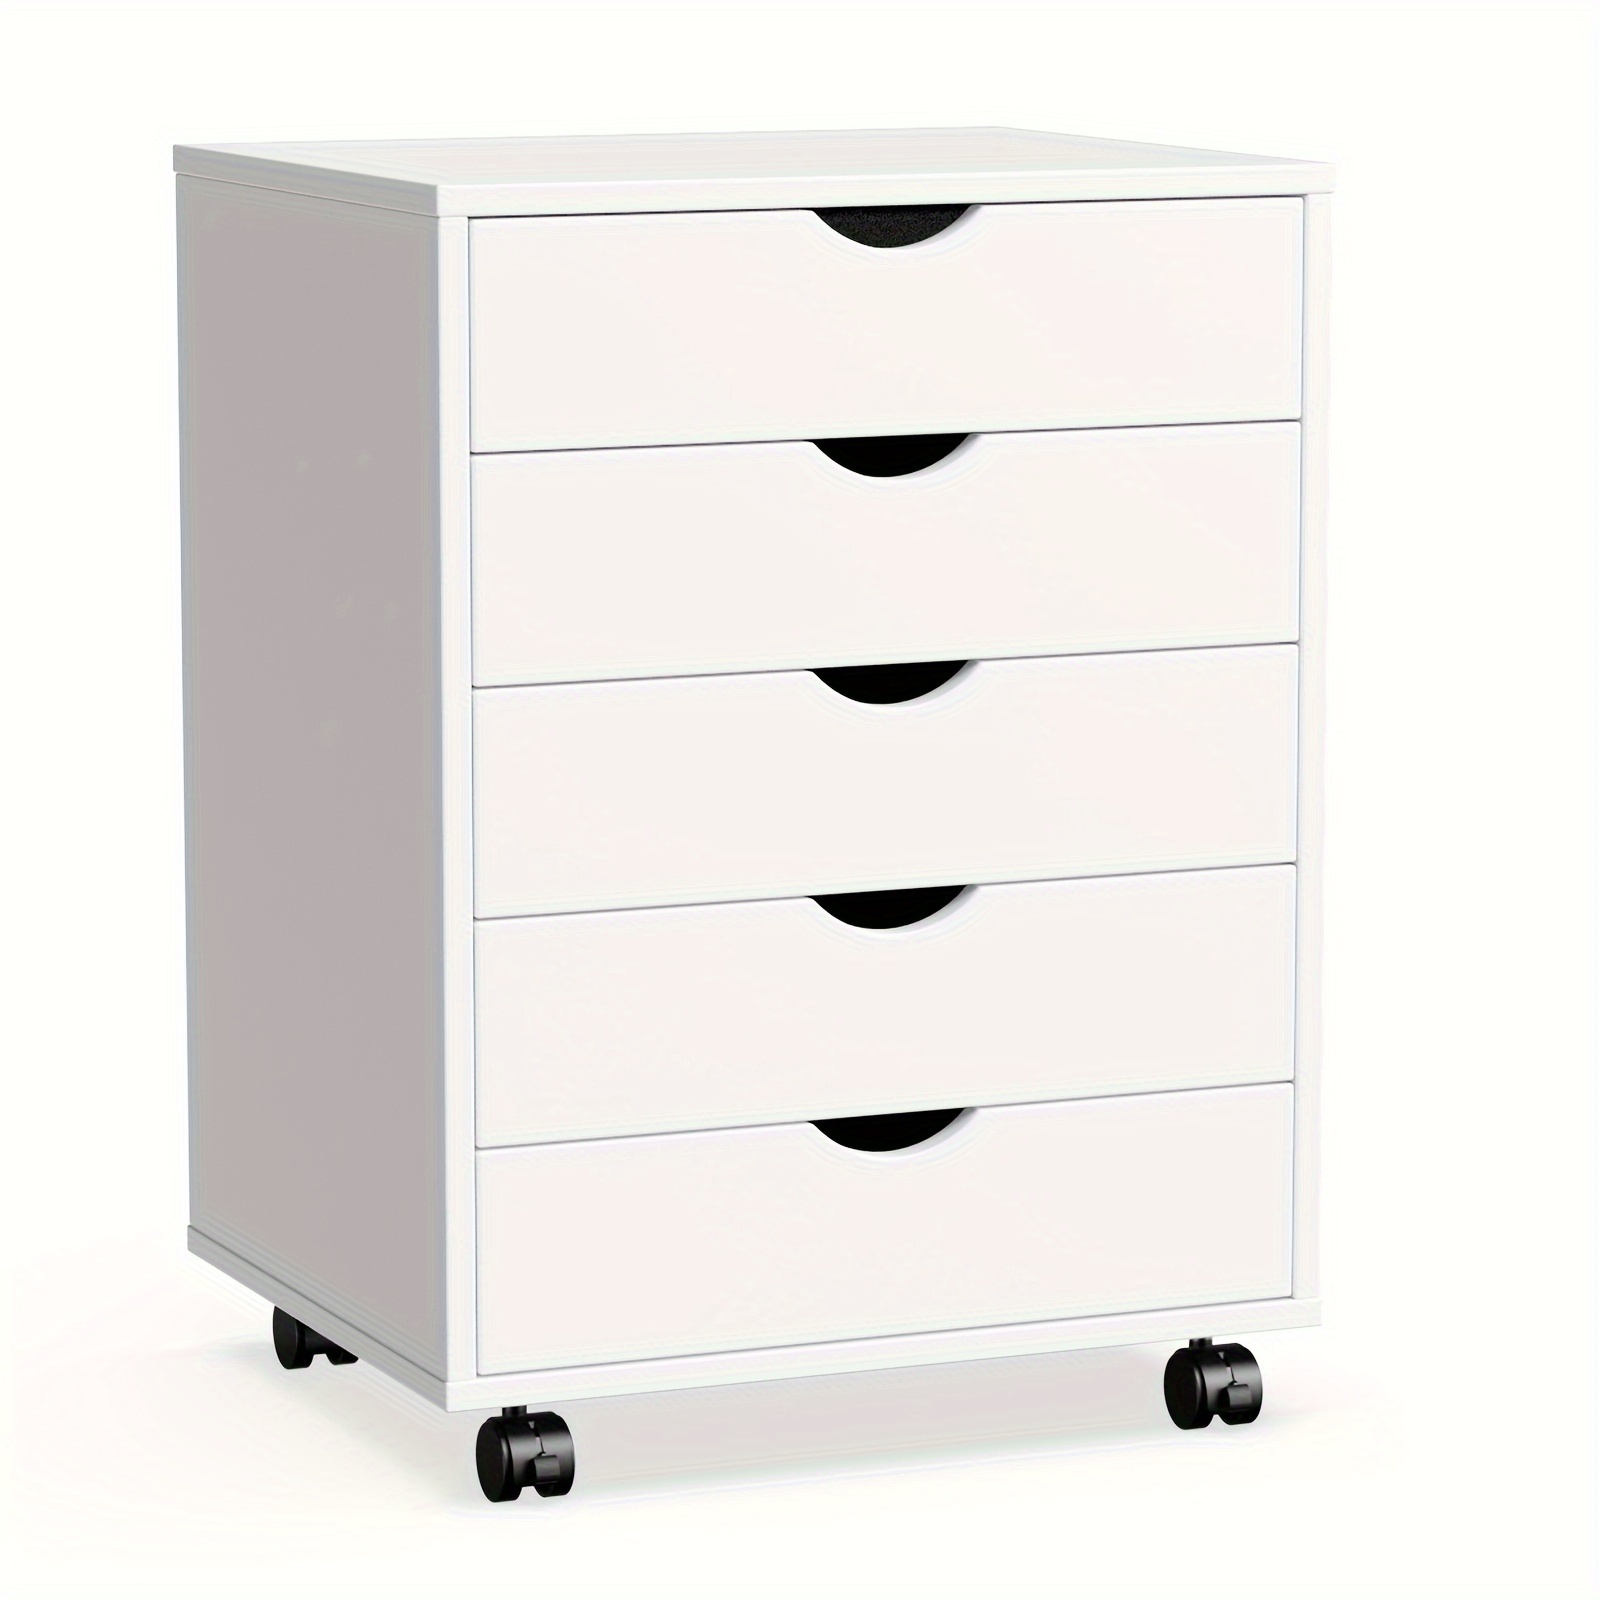 

Olixis 5-drawer Wooden Mobile Filing Cabinet, Large Capacity Lockers, Open Storage Box, Suitable For Home And Office Use